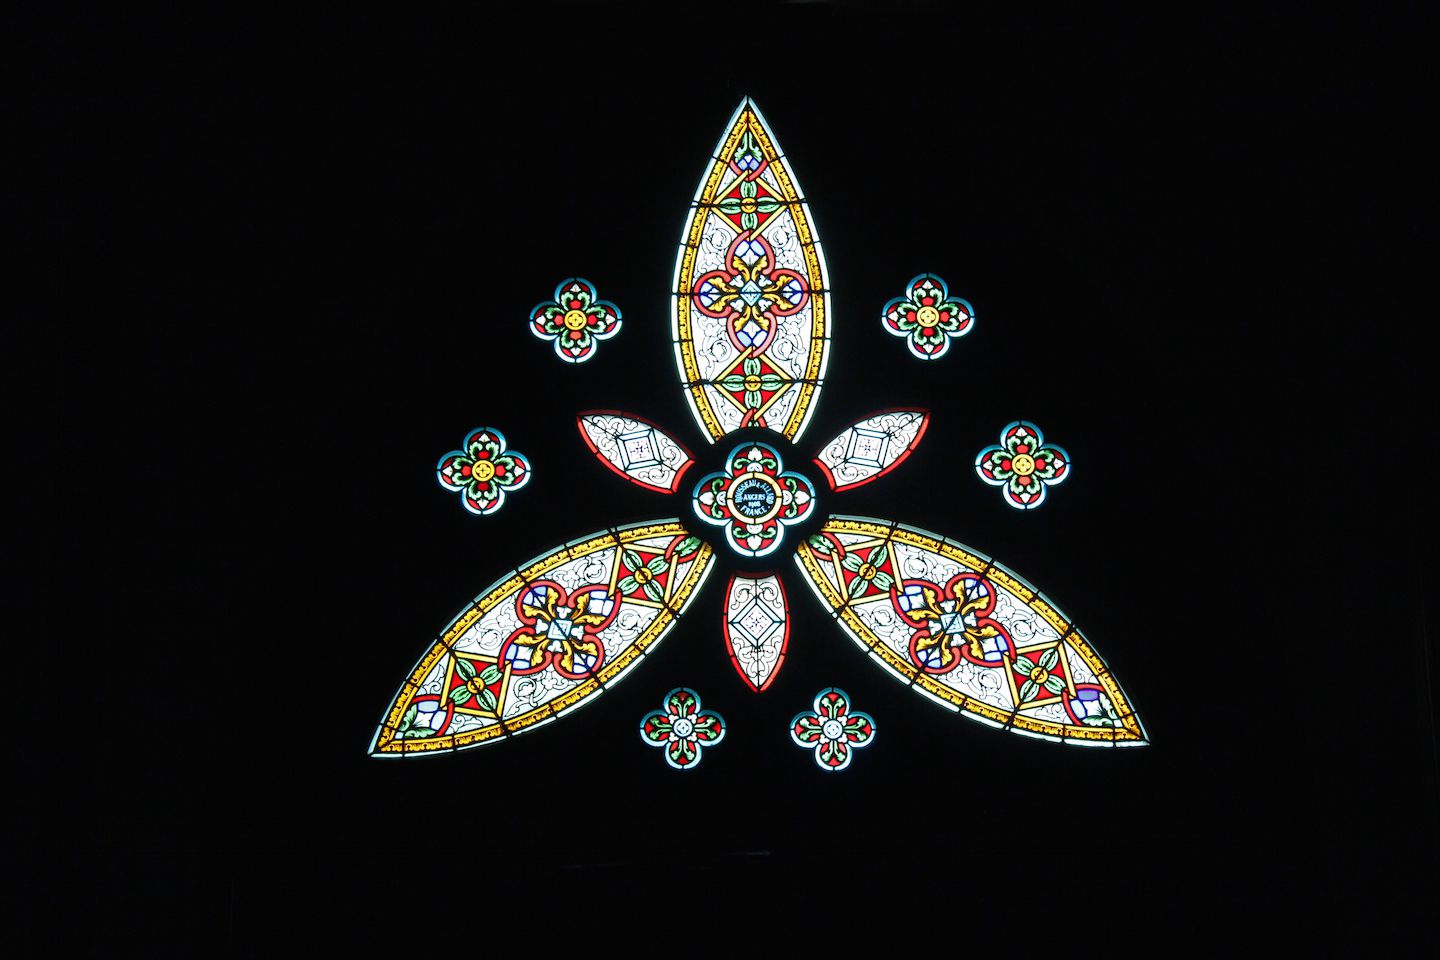 Stained glass window at St. Joseph's Cathedral